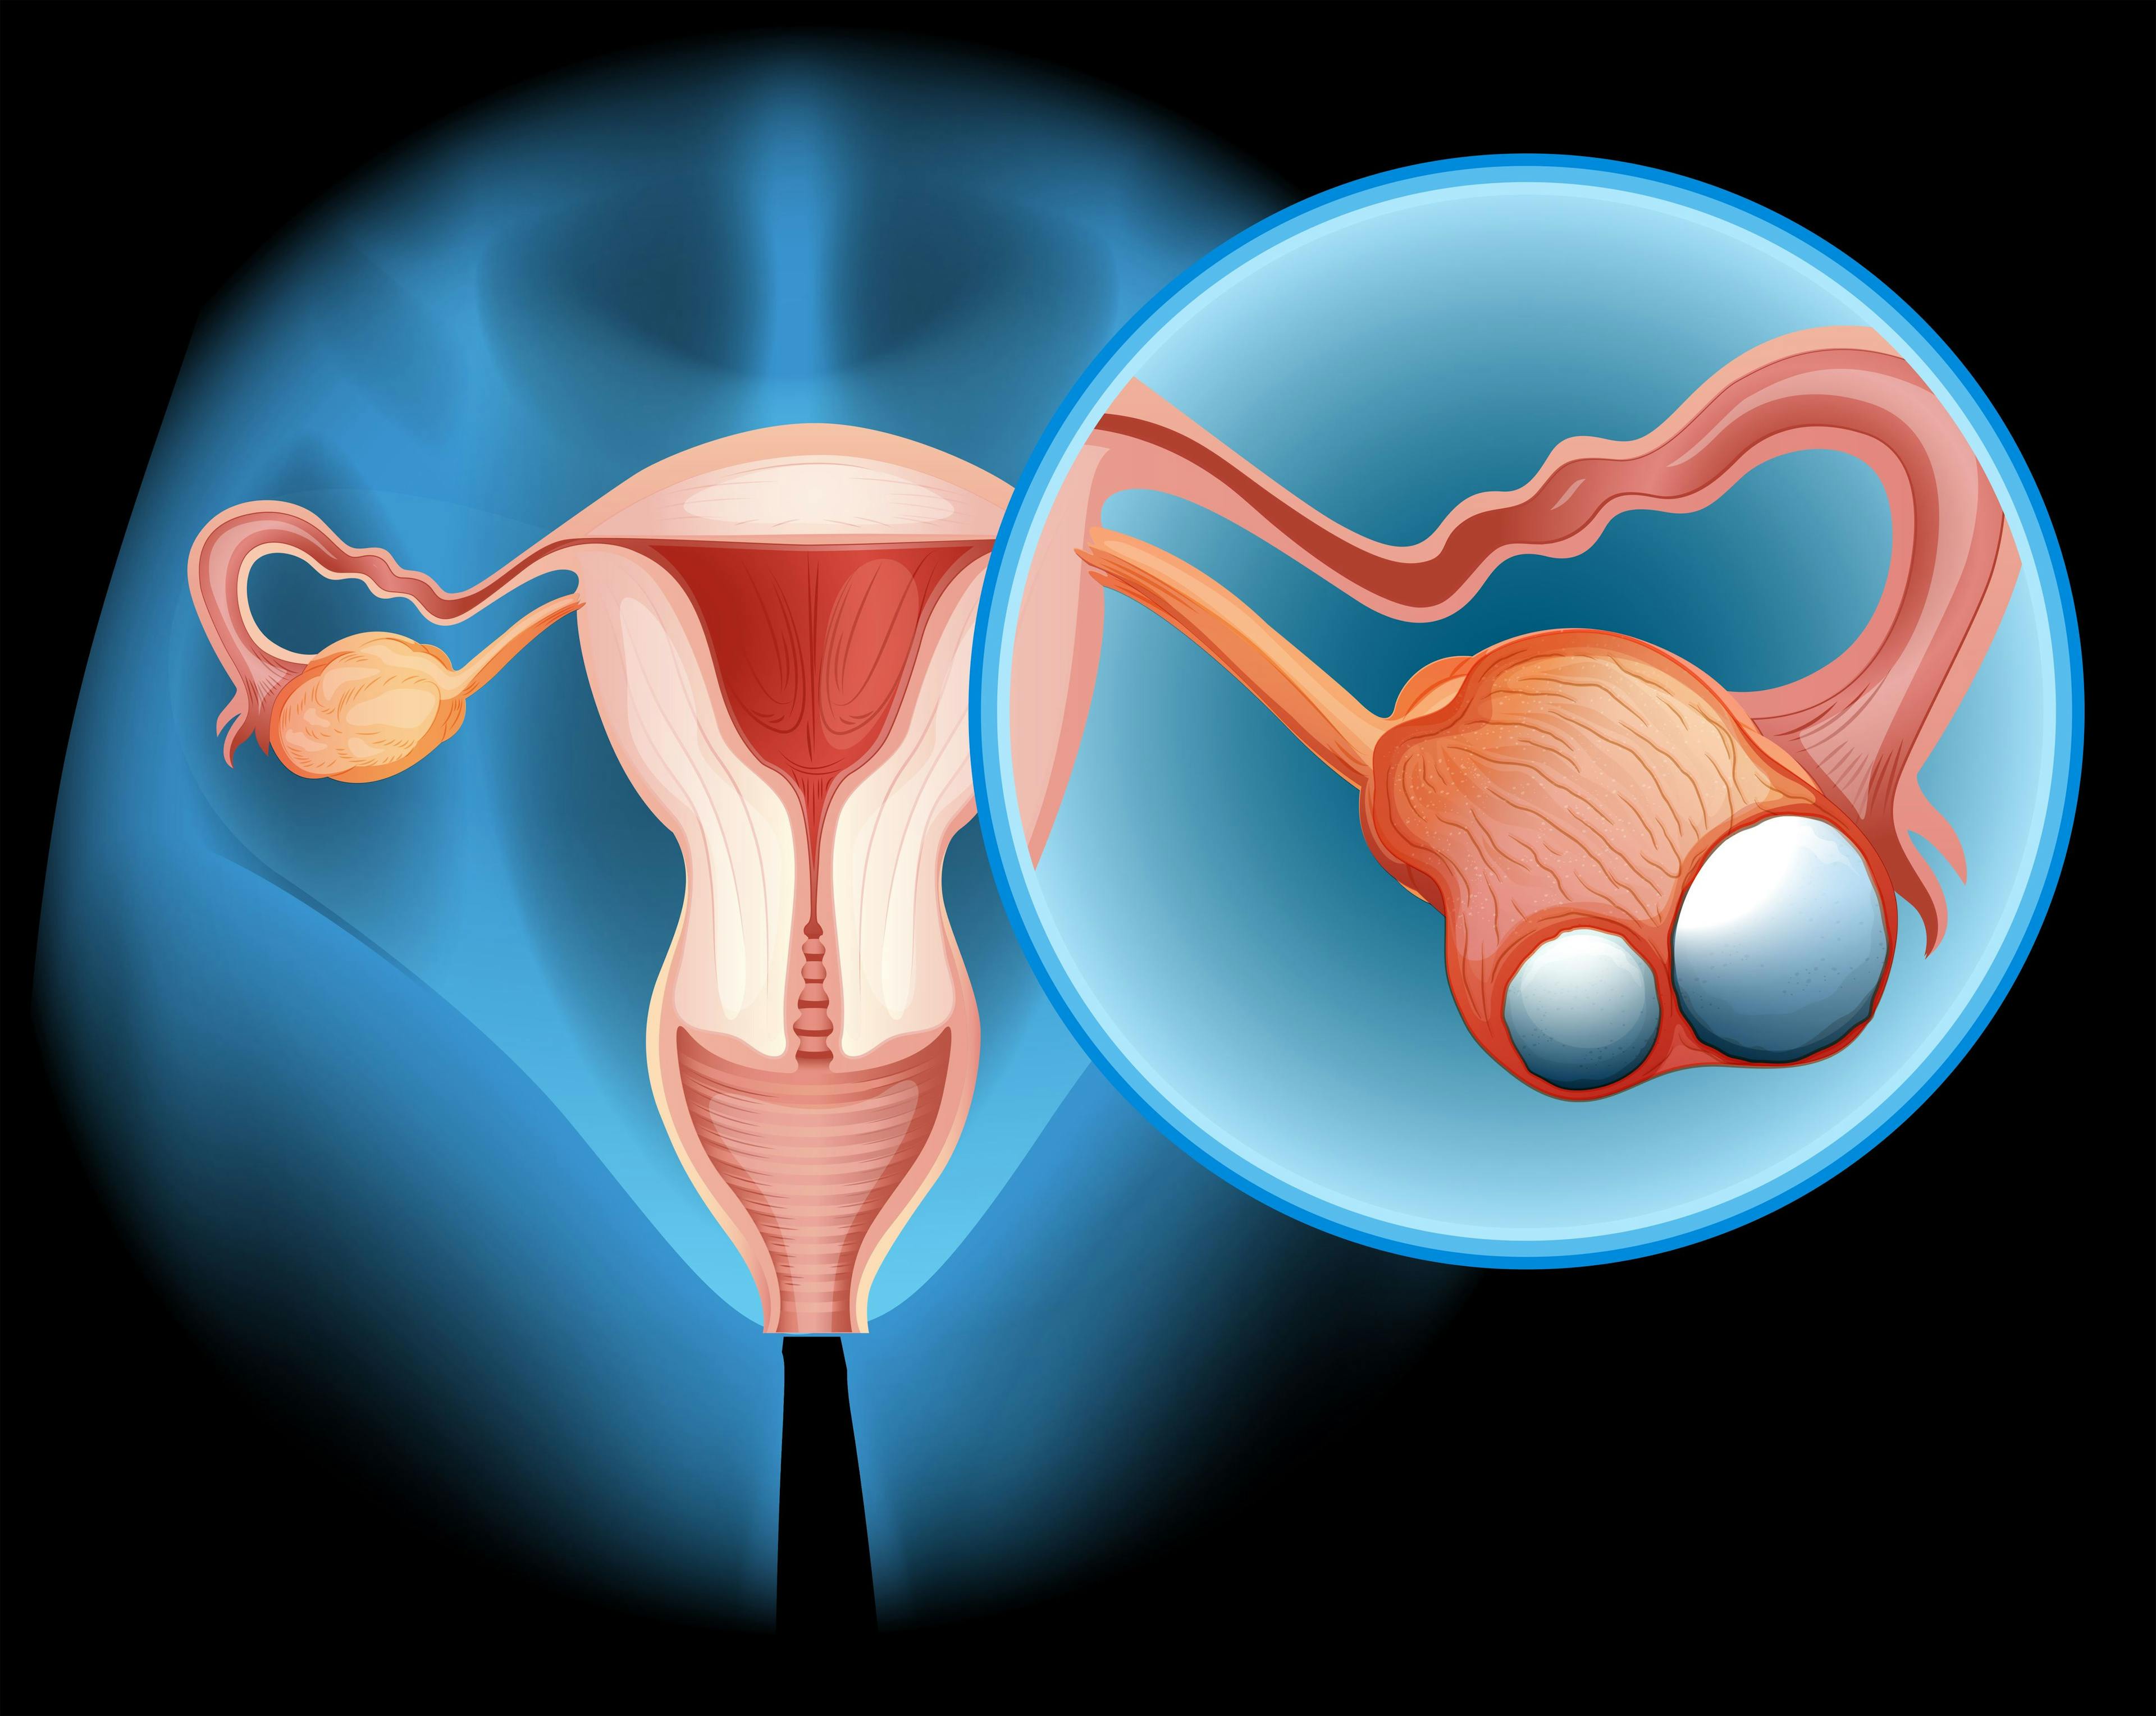 Image of ovaries and other parts of the reproductive system with ovaries and cancer highlighted.